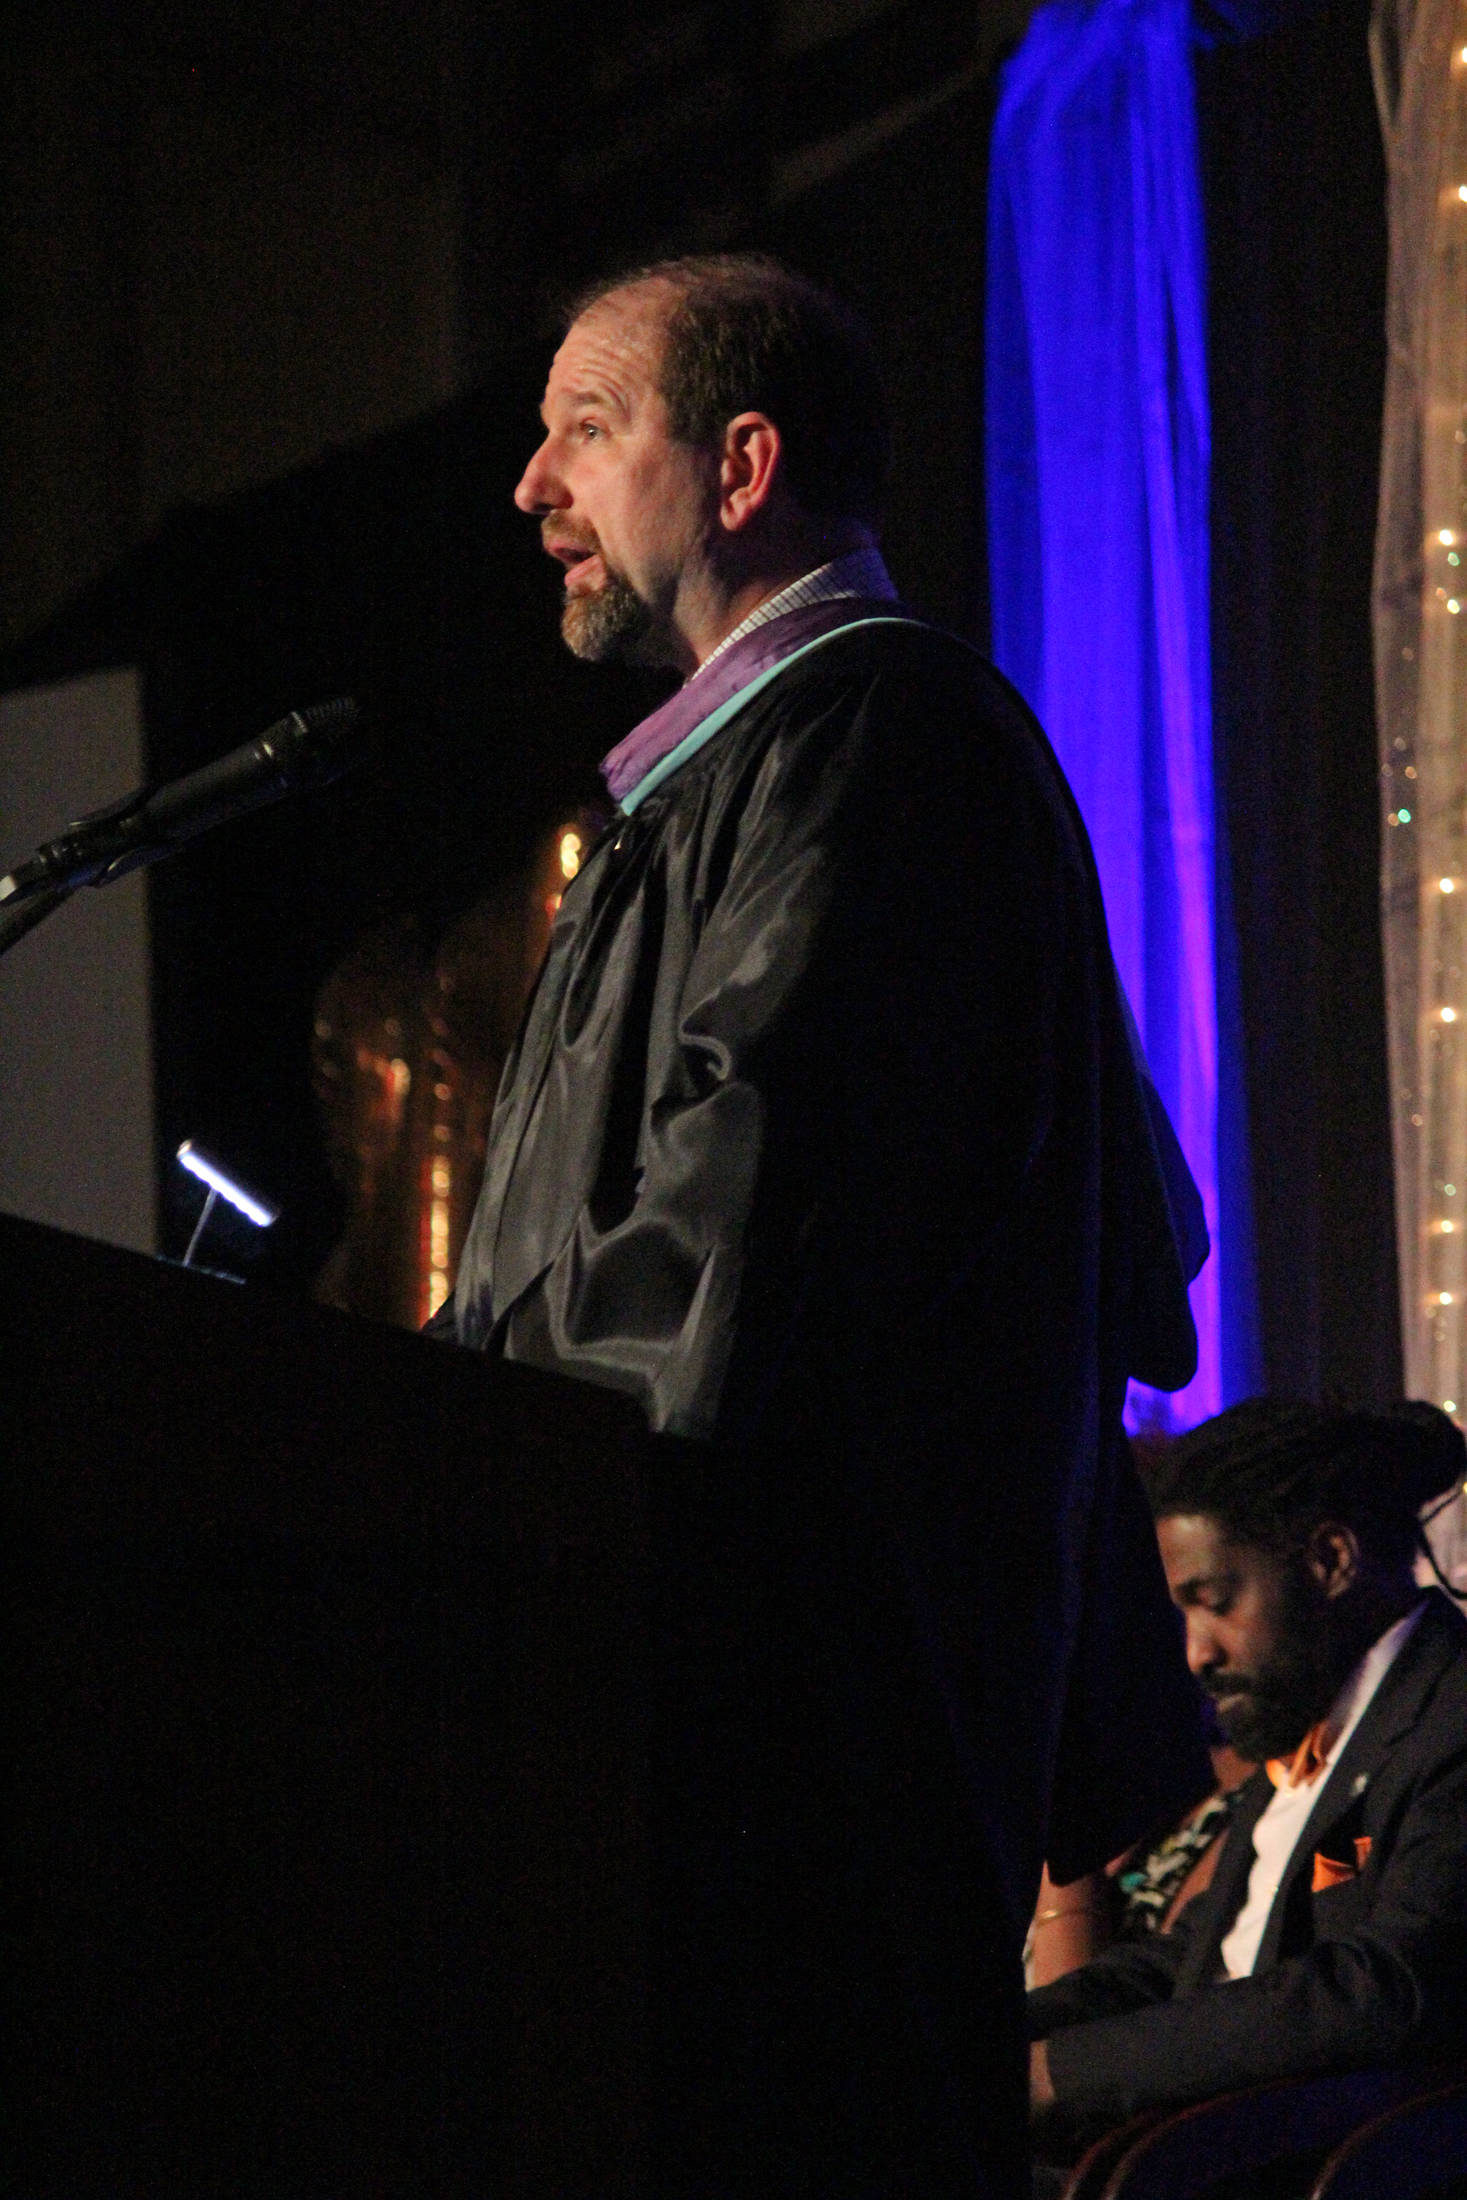 Homer High School Principal Douglas Waclawski welcomes guests to the graduation ceremony for the class of 2018 on Tuesday, May 22, 2018 at the school in Homer, Alaska. Waclawski’s son, Denver, was among the evening’s graduates and one of the four valedictorians. (Photo by Megan Pacer/Homer News)